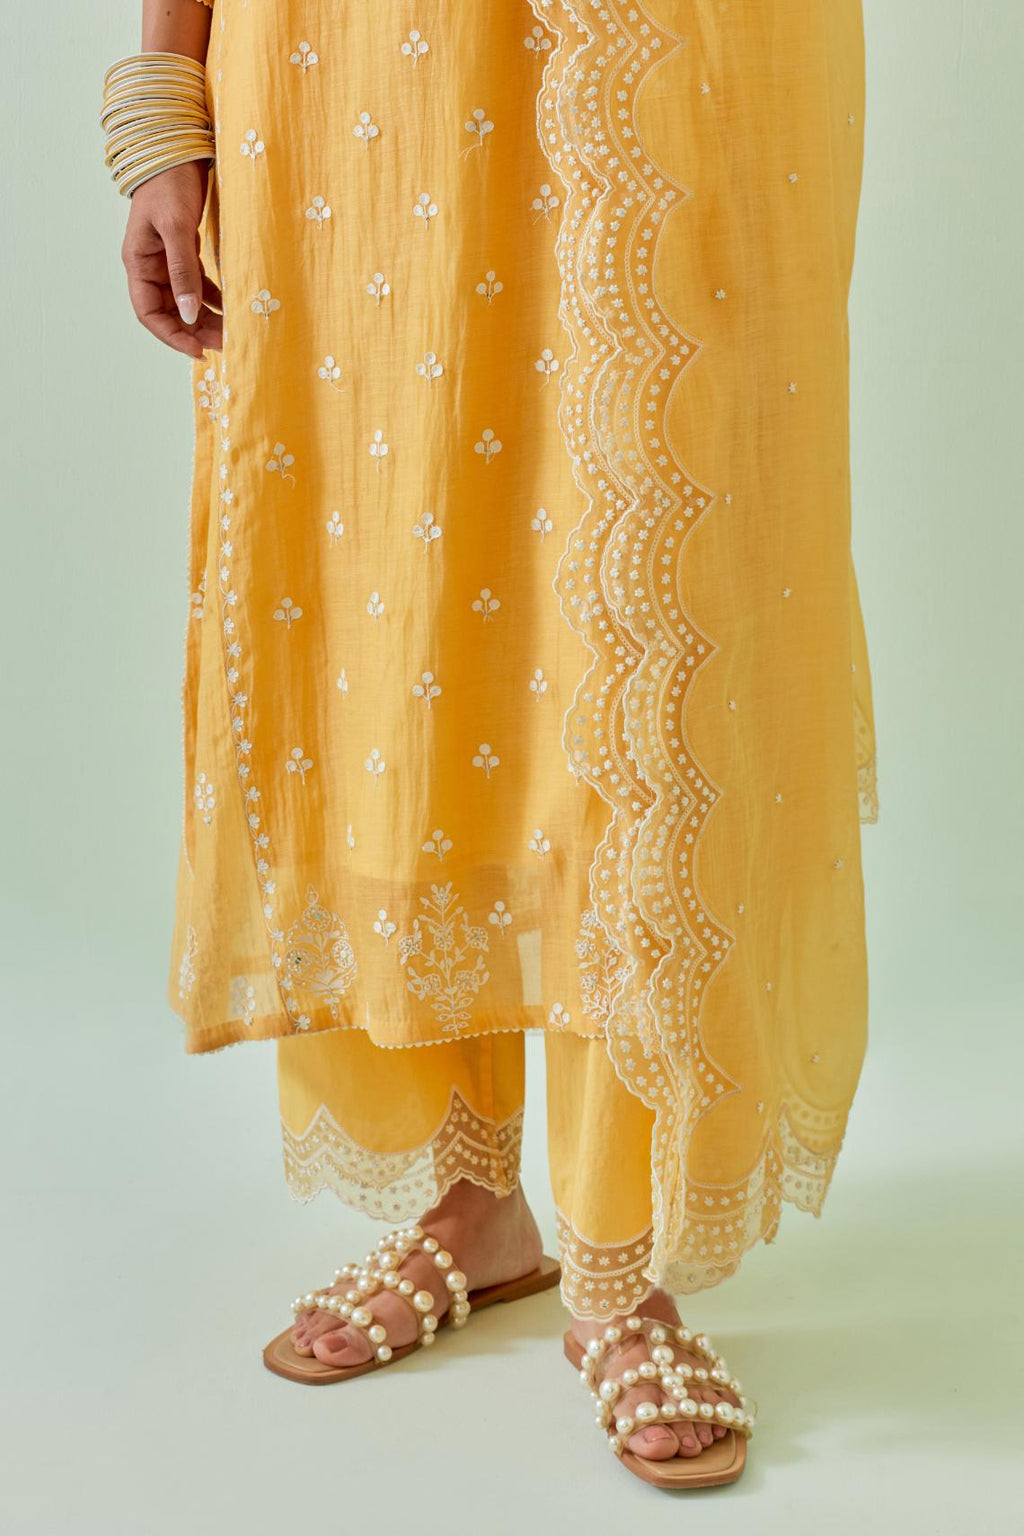 Yellow straight kurta set with all-over off white Dori embroidery, highlighted with delicate beaded work and embroidery detail at side panel joint seams.